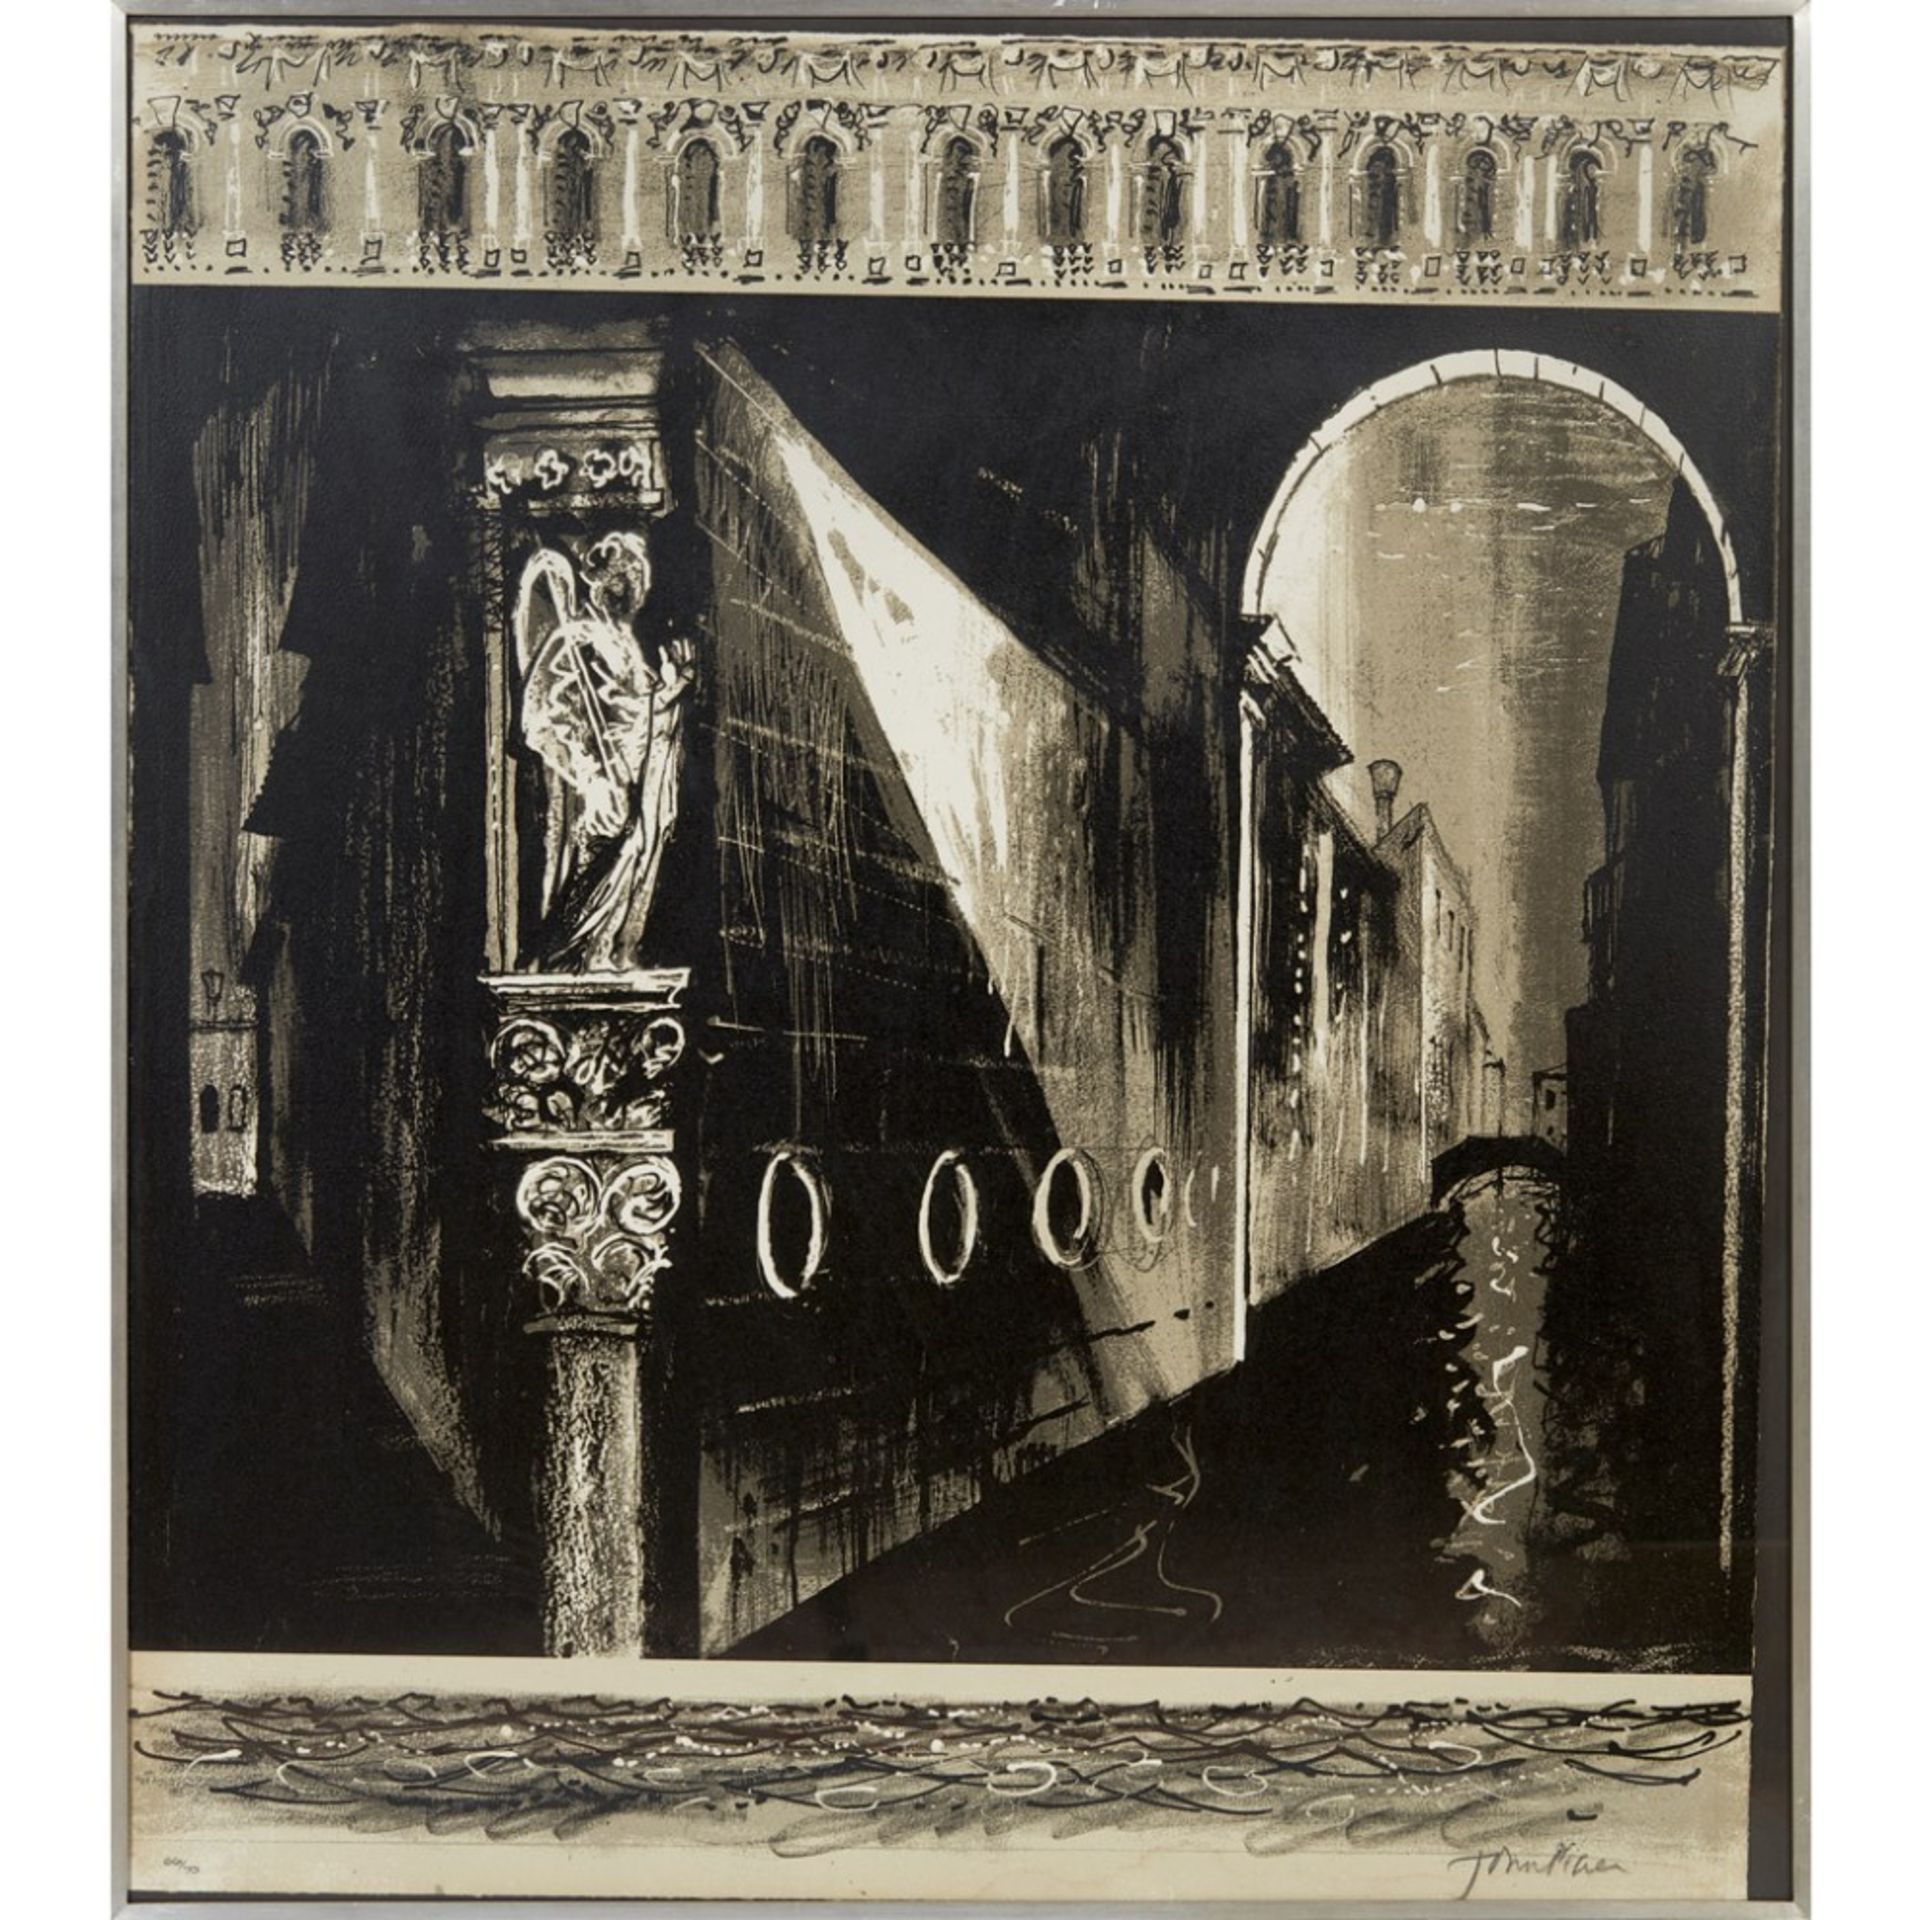 [§] JOHN PIPER C.H. (BRITISH 1903-1992) DEATH IN VENICE, SIDE PANEL LEFT Signed and numbered 66/70